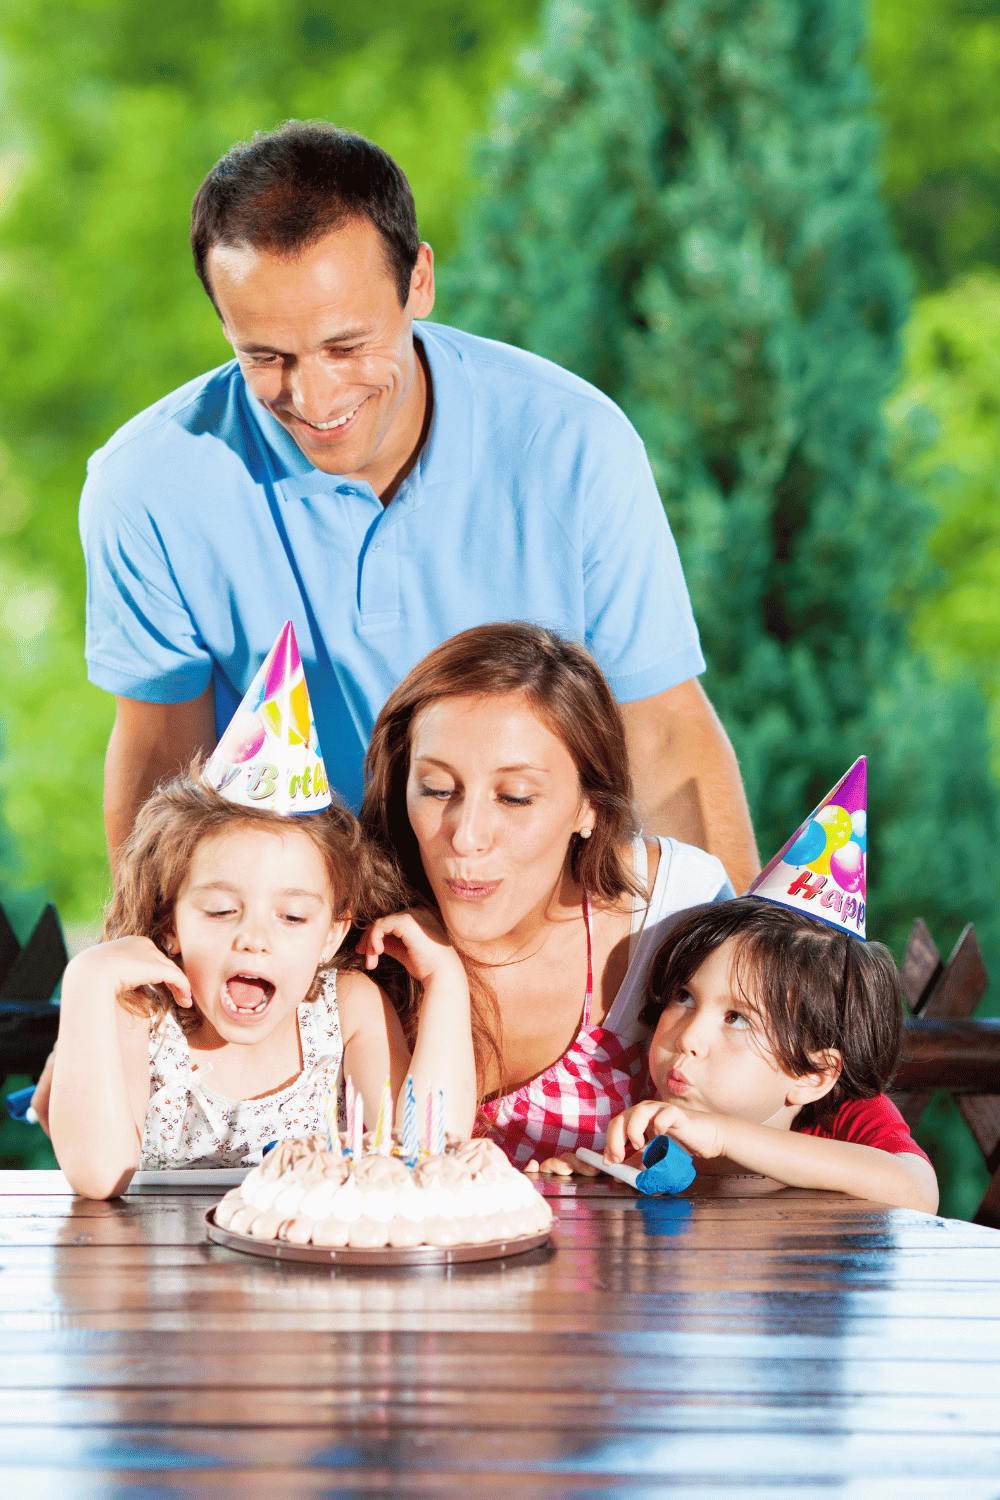 How to Plan the Perfect Family Event